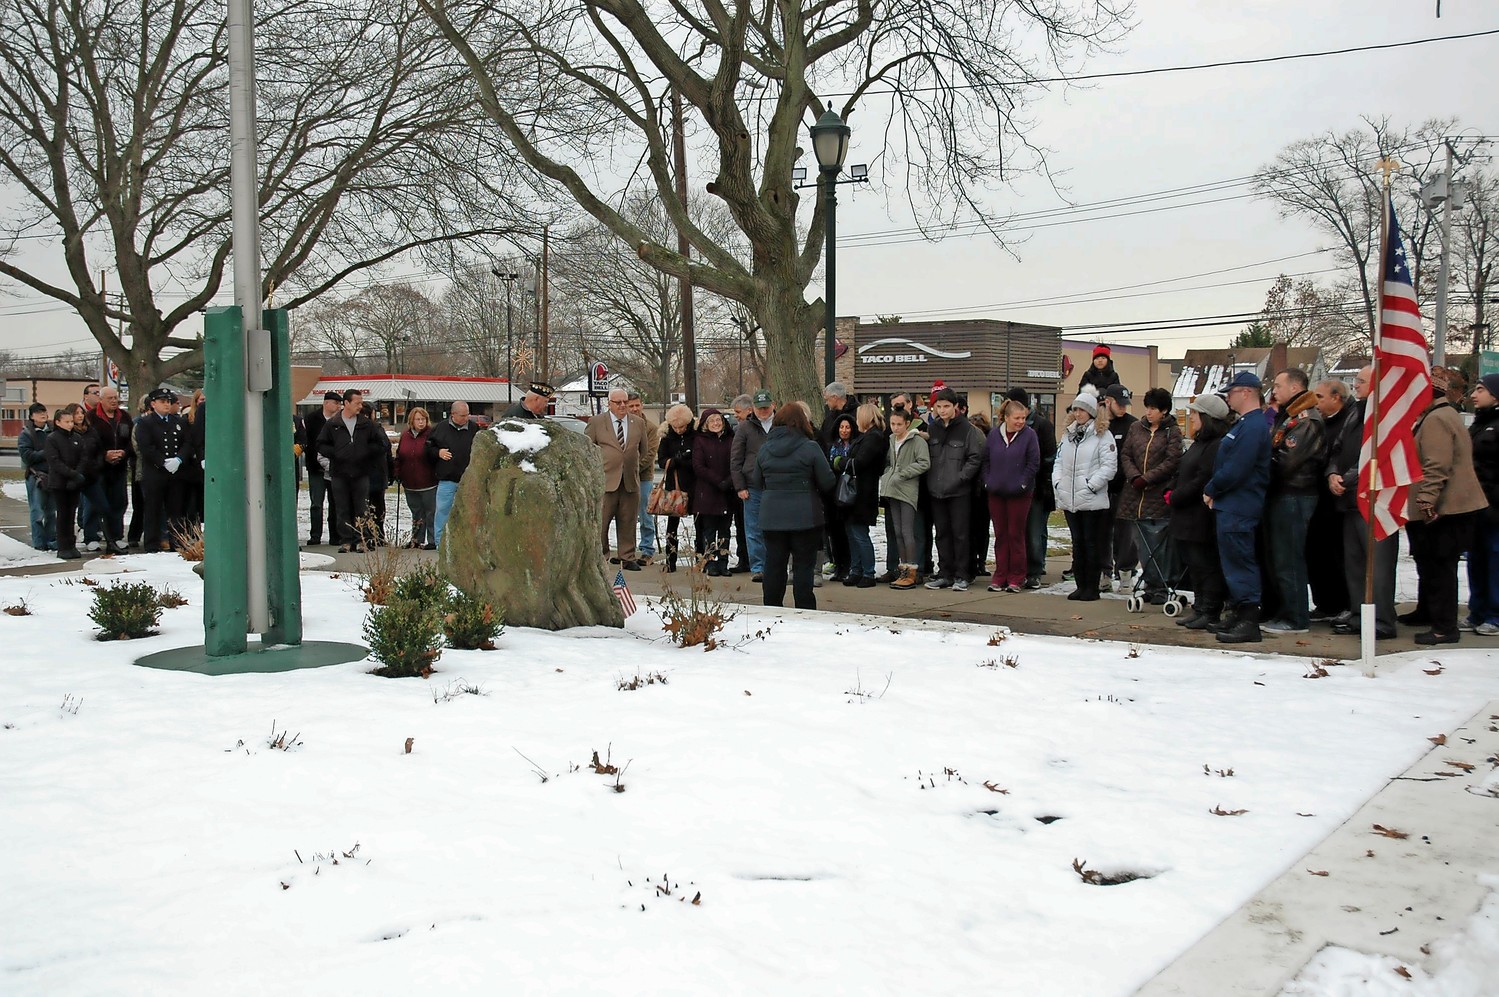 Members from various community groups in Seaford attended an Eagle Scout dedication ceremony on Dec. 17.